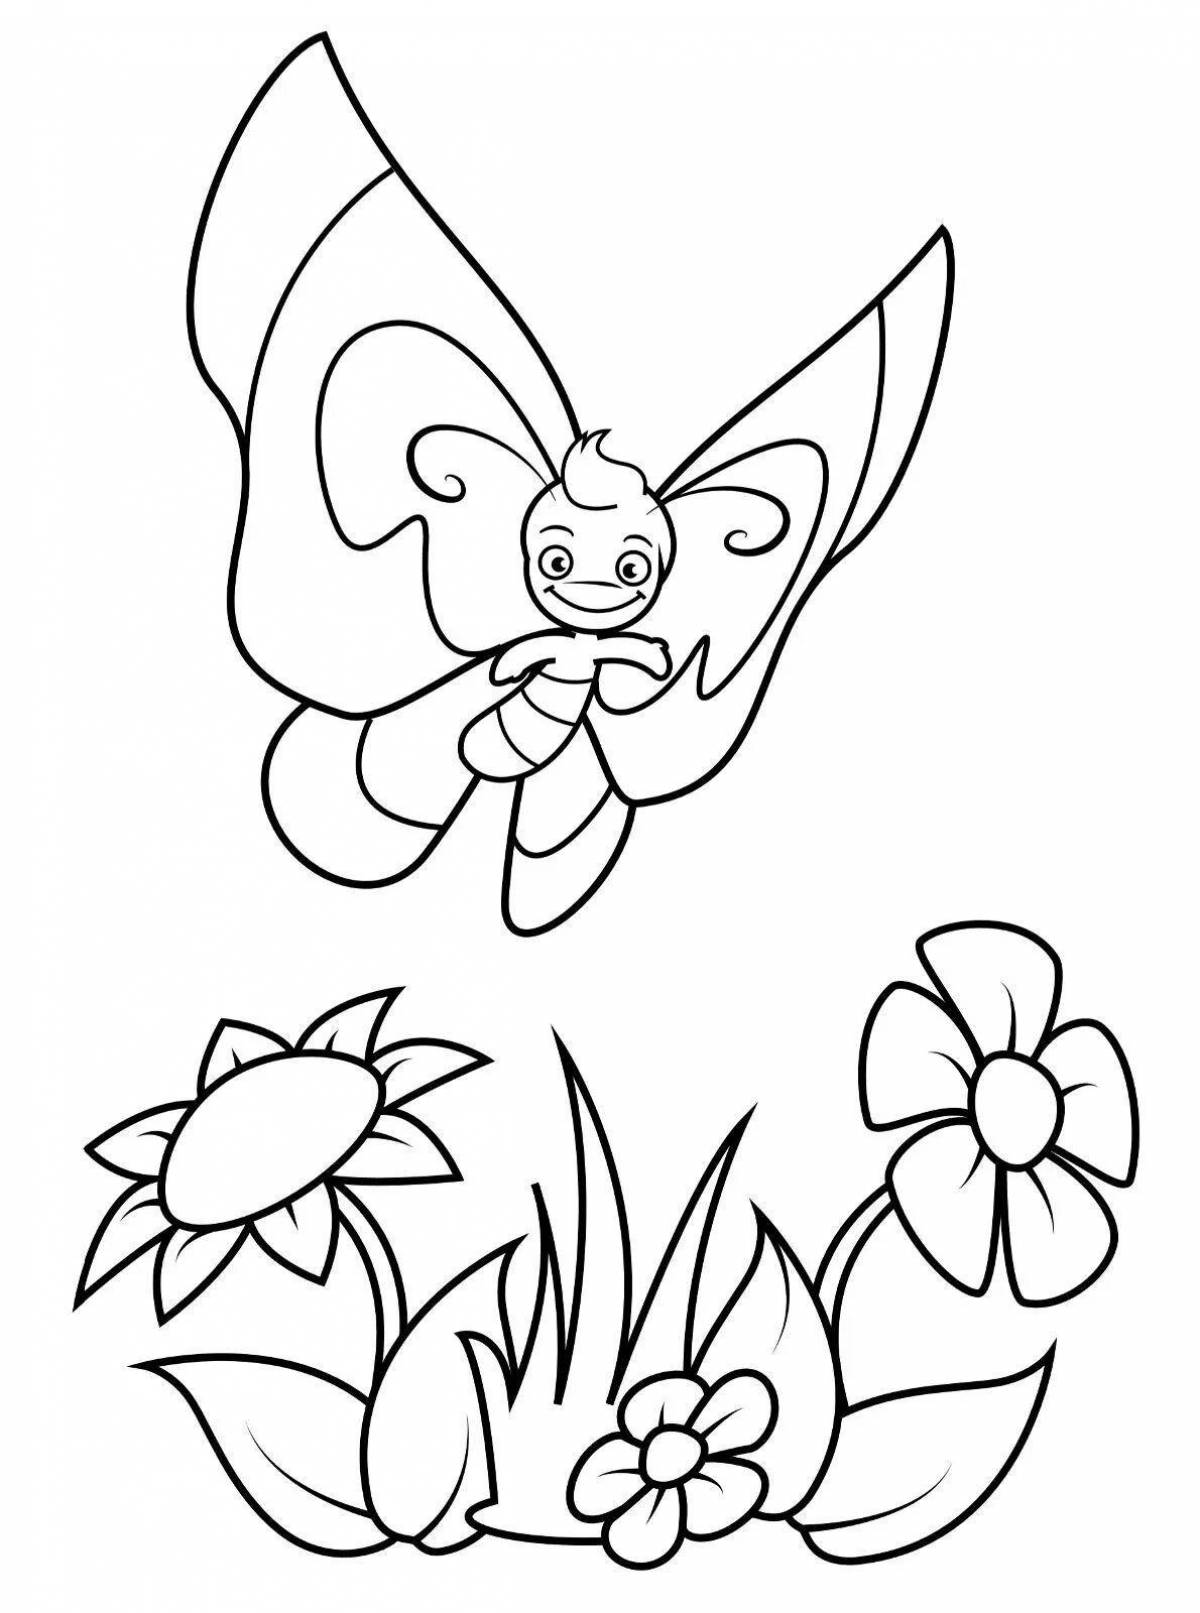 Blissful coloring flowers and butterflies